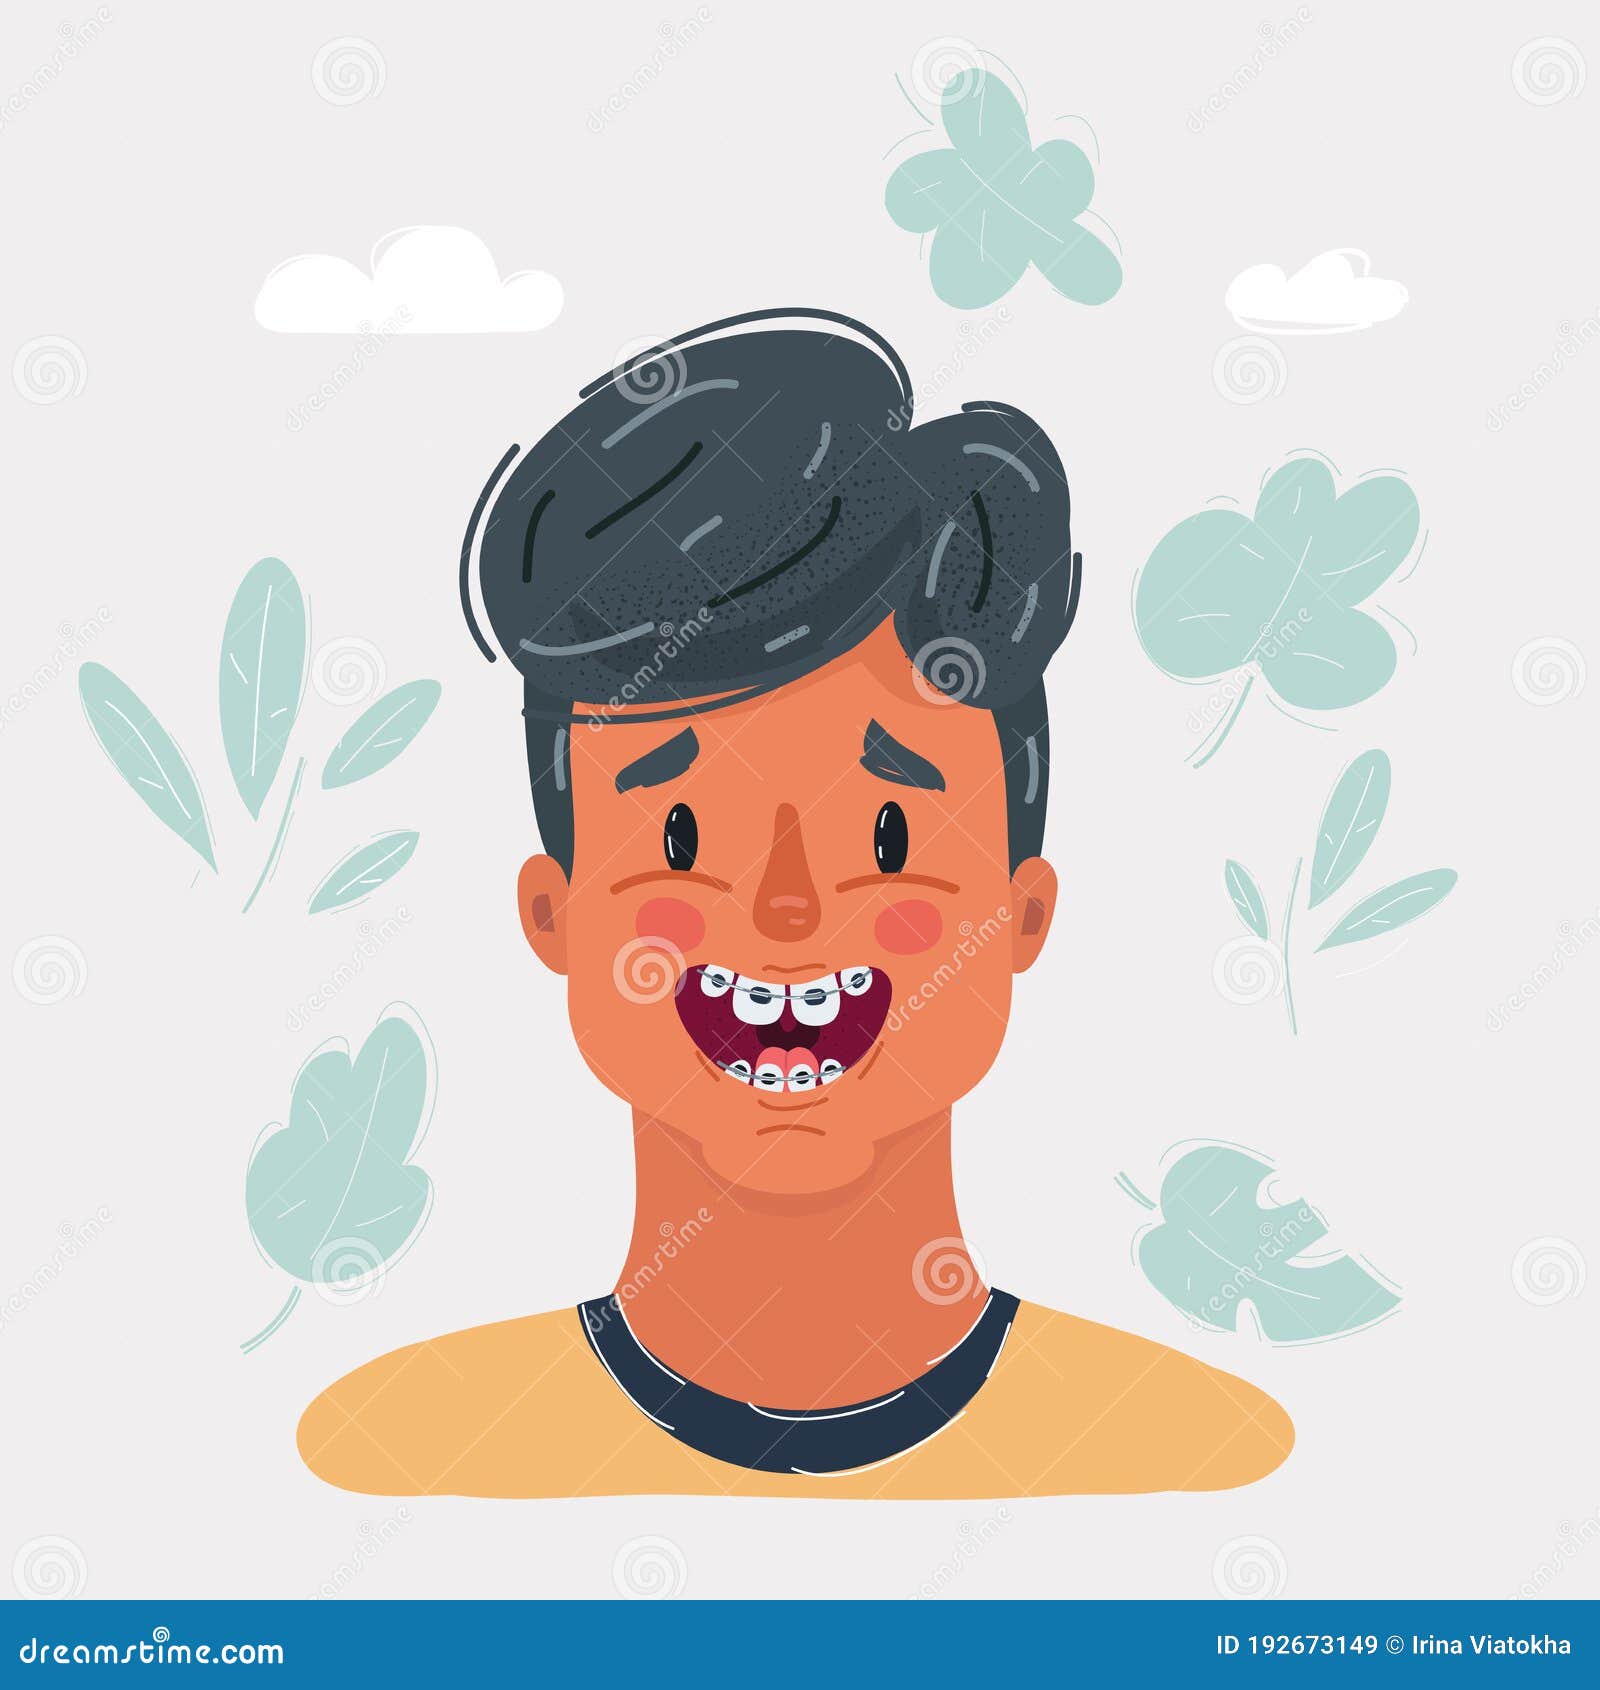 Download Vector Illustration Of Boy Smile With Braces On Teeth ...